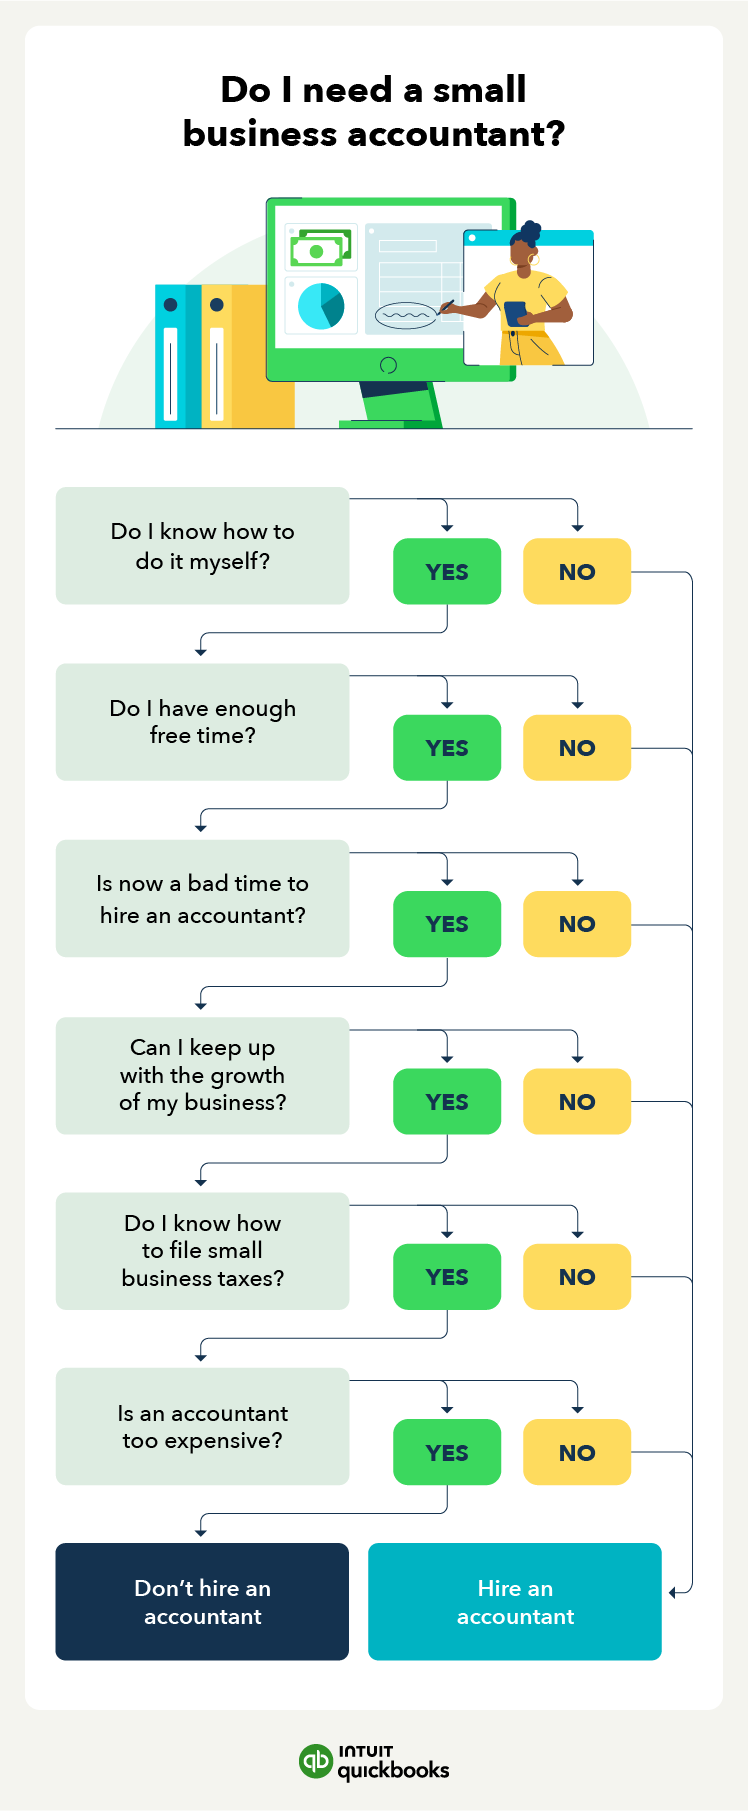 A flowchart helps break down the decision-making process for hiring an accountant for a small business.